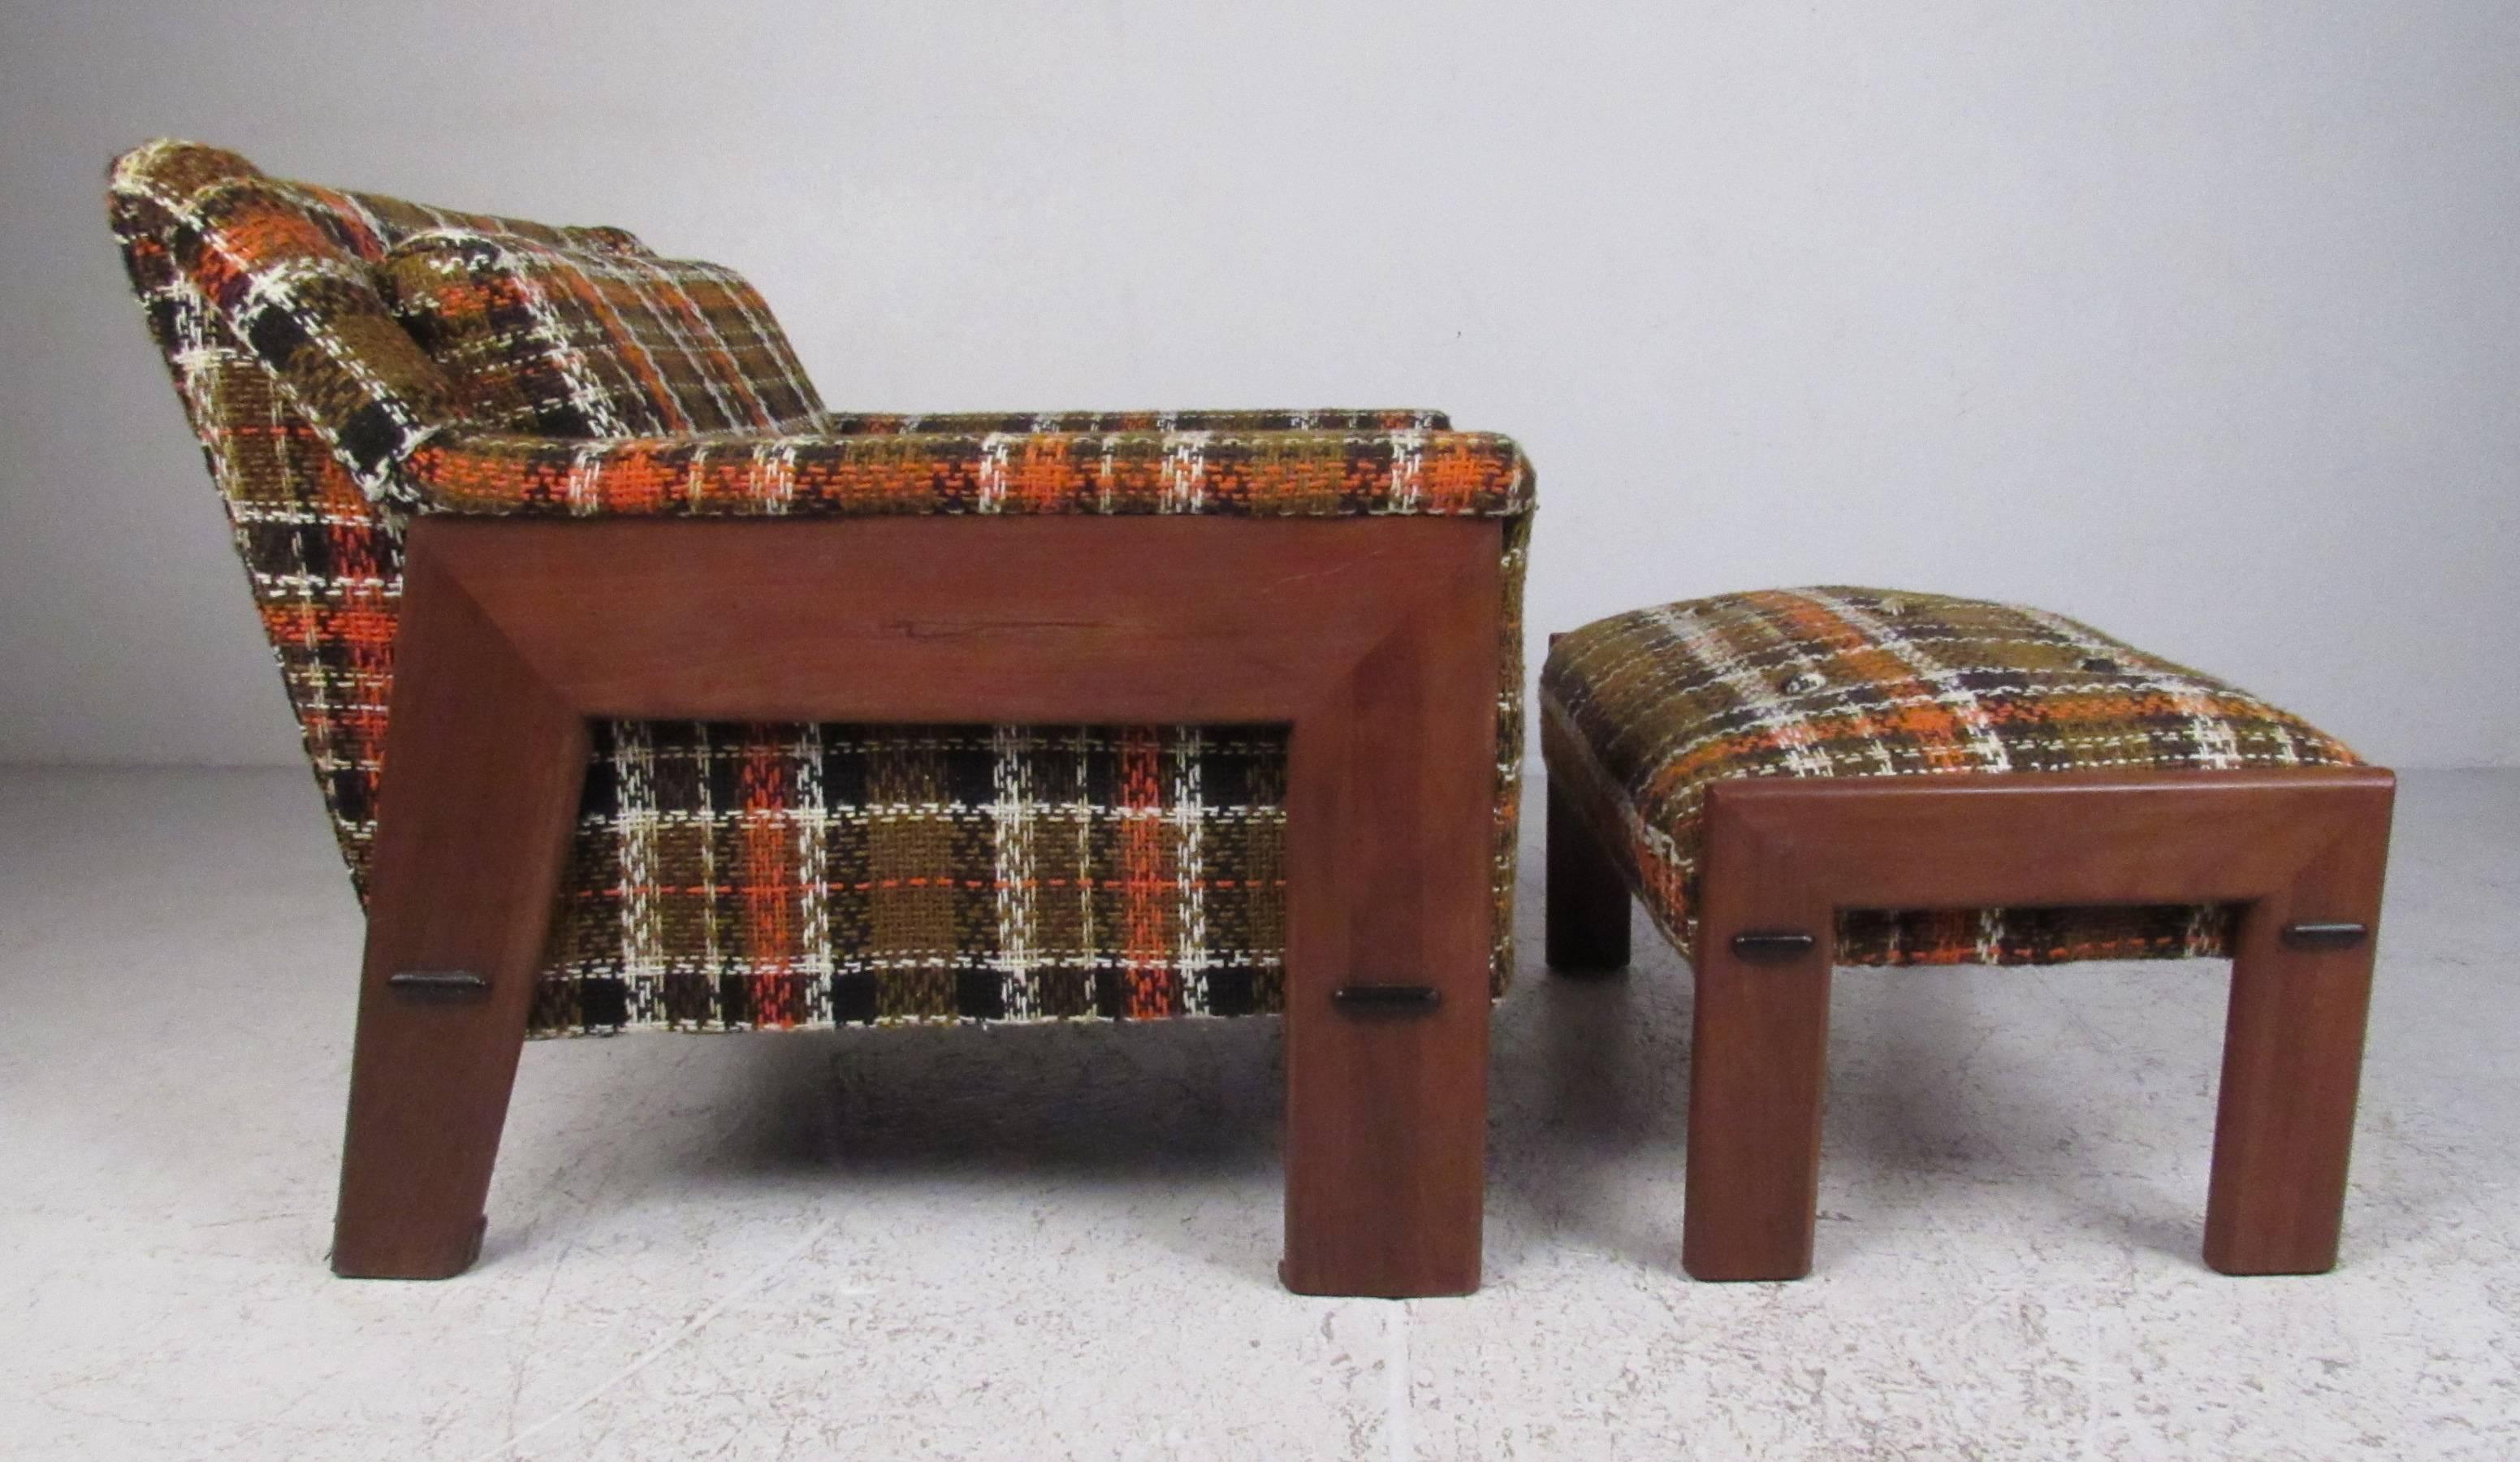 Well constructed and comfortable, this midcentury chair and ottoman with it's walnut frame and houndstooth upholstery will make a strong design statement in any living room or den environment. Please confirm item location (NY or NJ) with dealer.